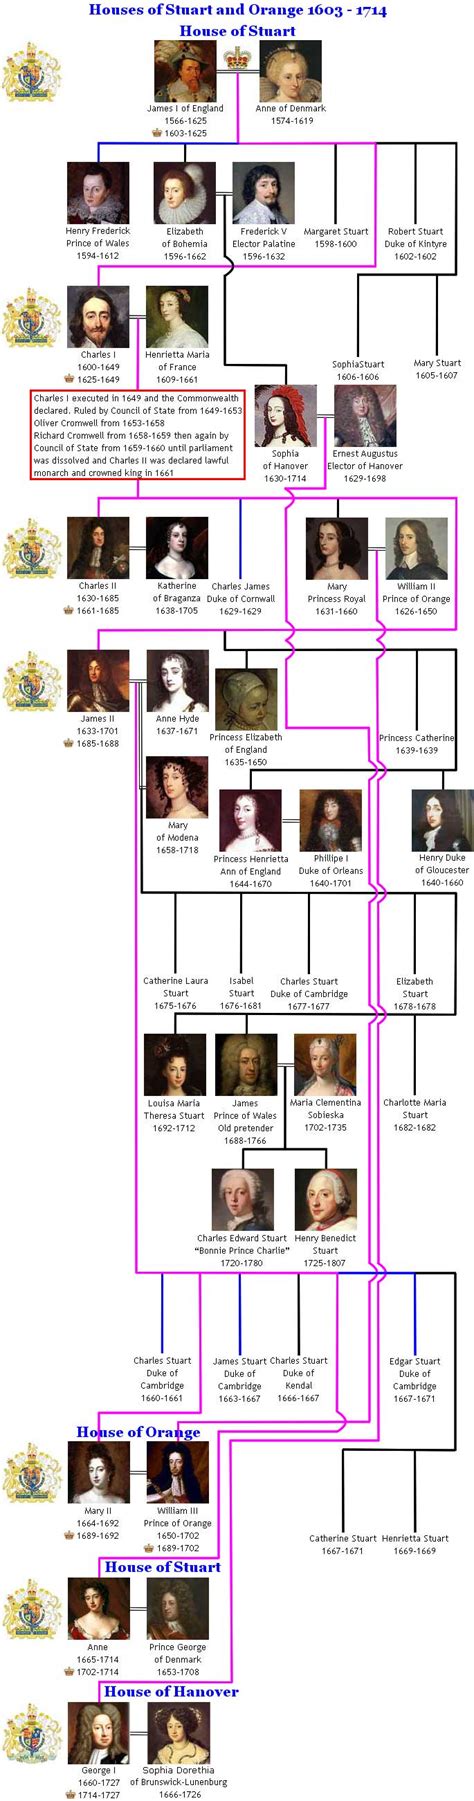 The role of the royal family. Royal House of Stuart - British Royal Family Tree